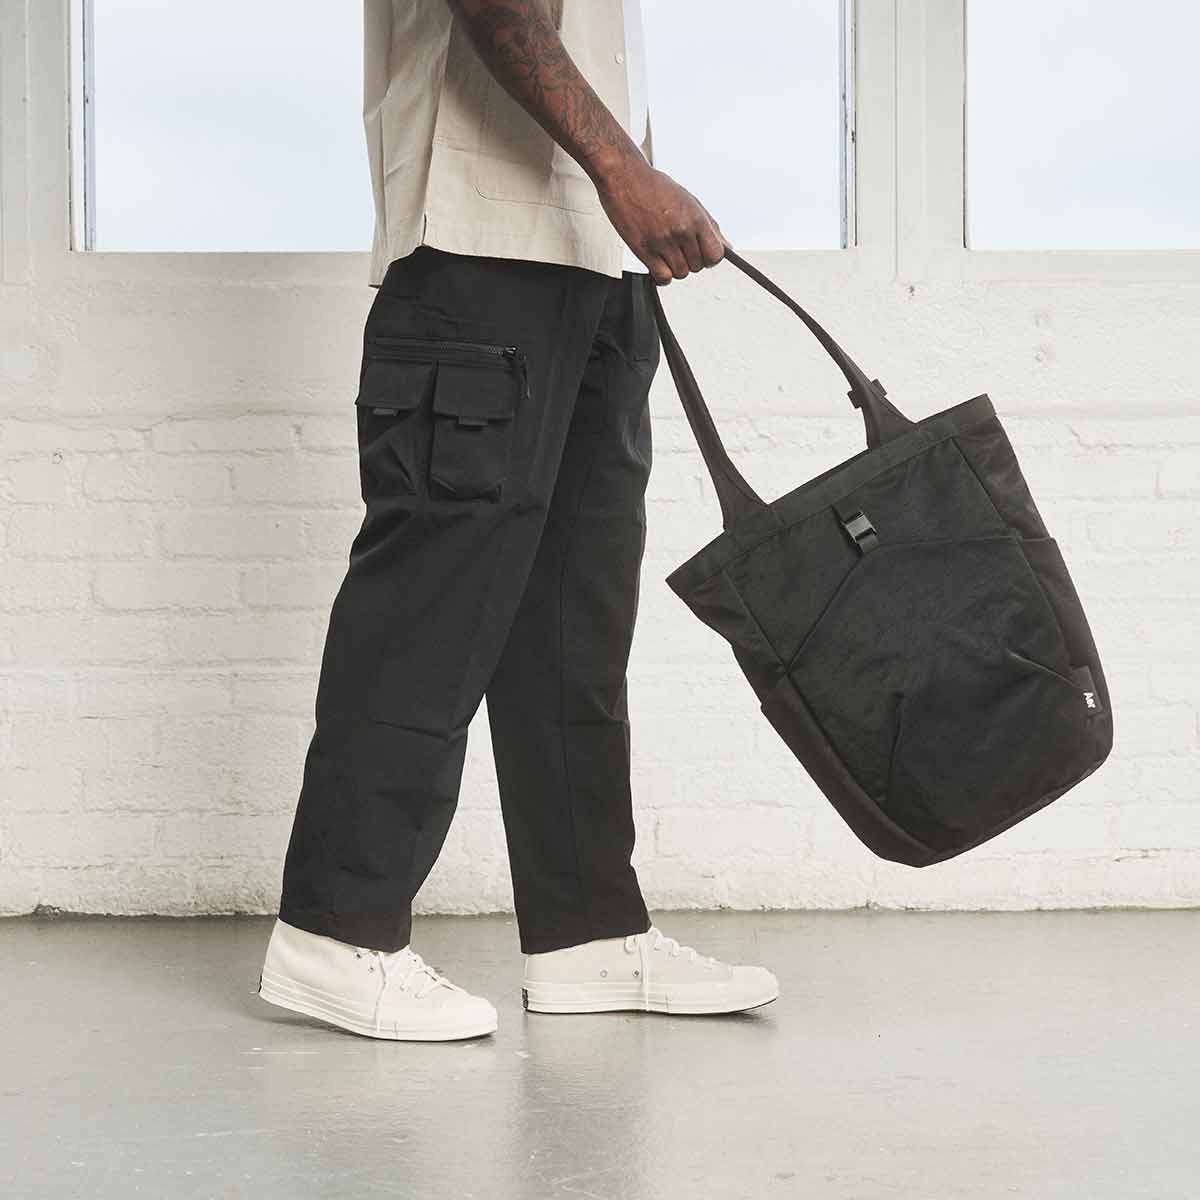 Go Tote 2 Black | Aer ｜ エアー公式通販サイト